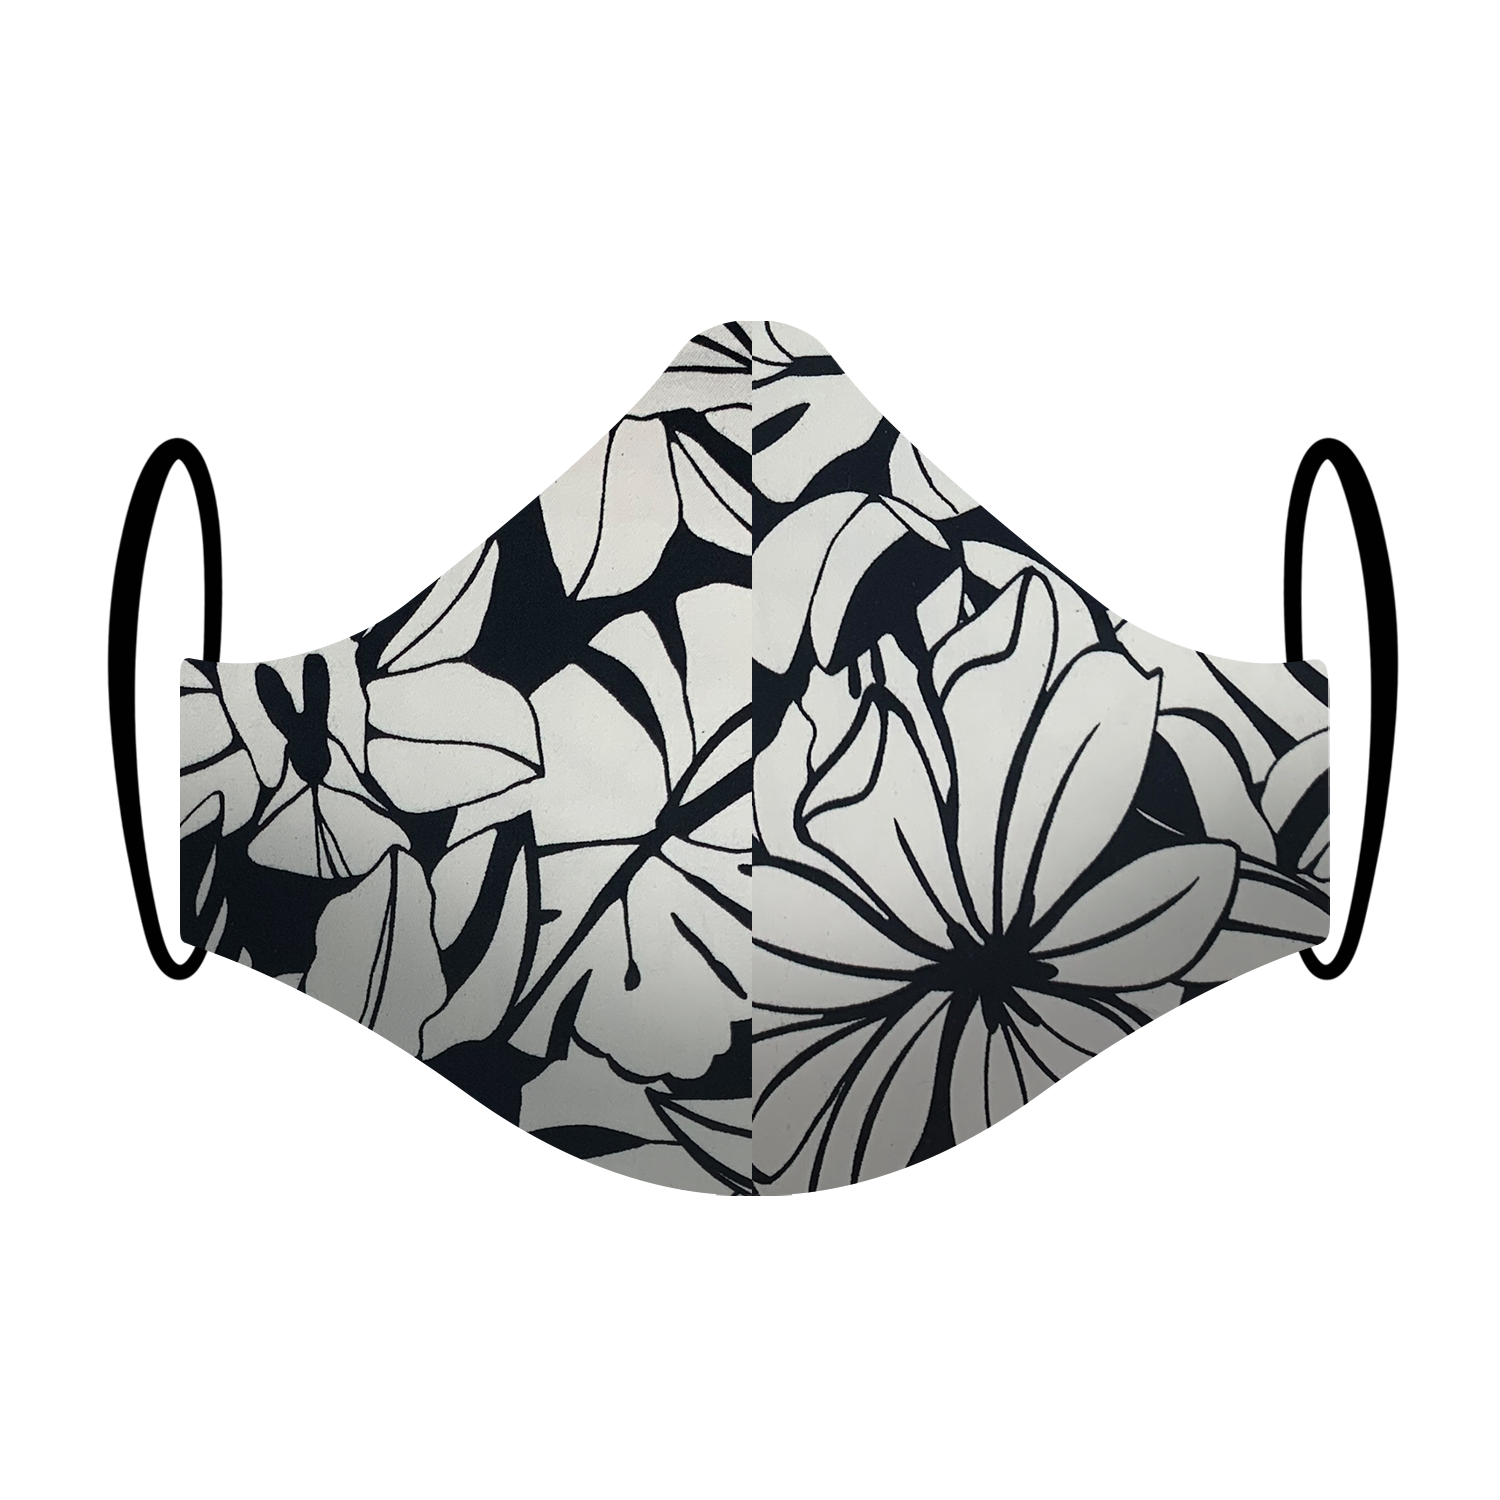 Triple layered face mask made in Melbourne Australia from cotton and poplin featuring a unique monochromatic abstract leaf print